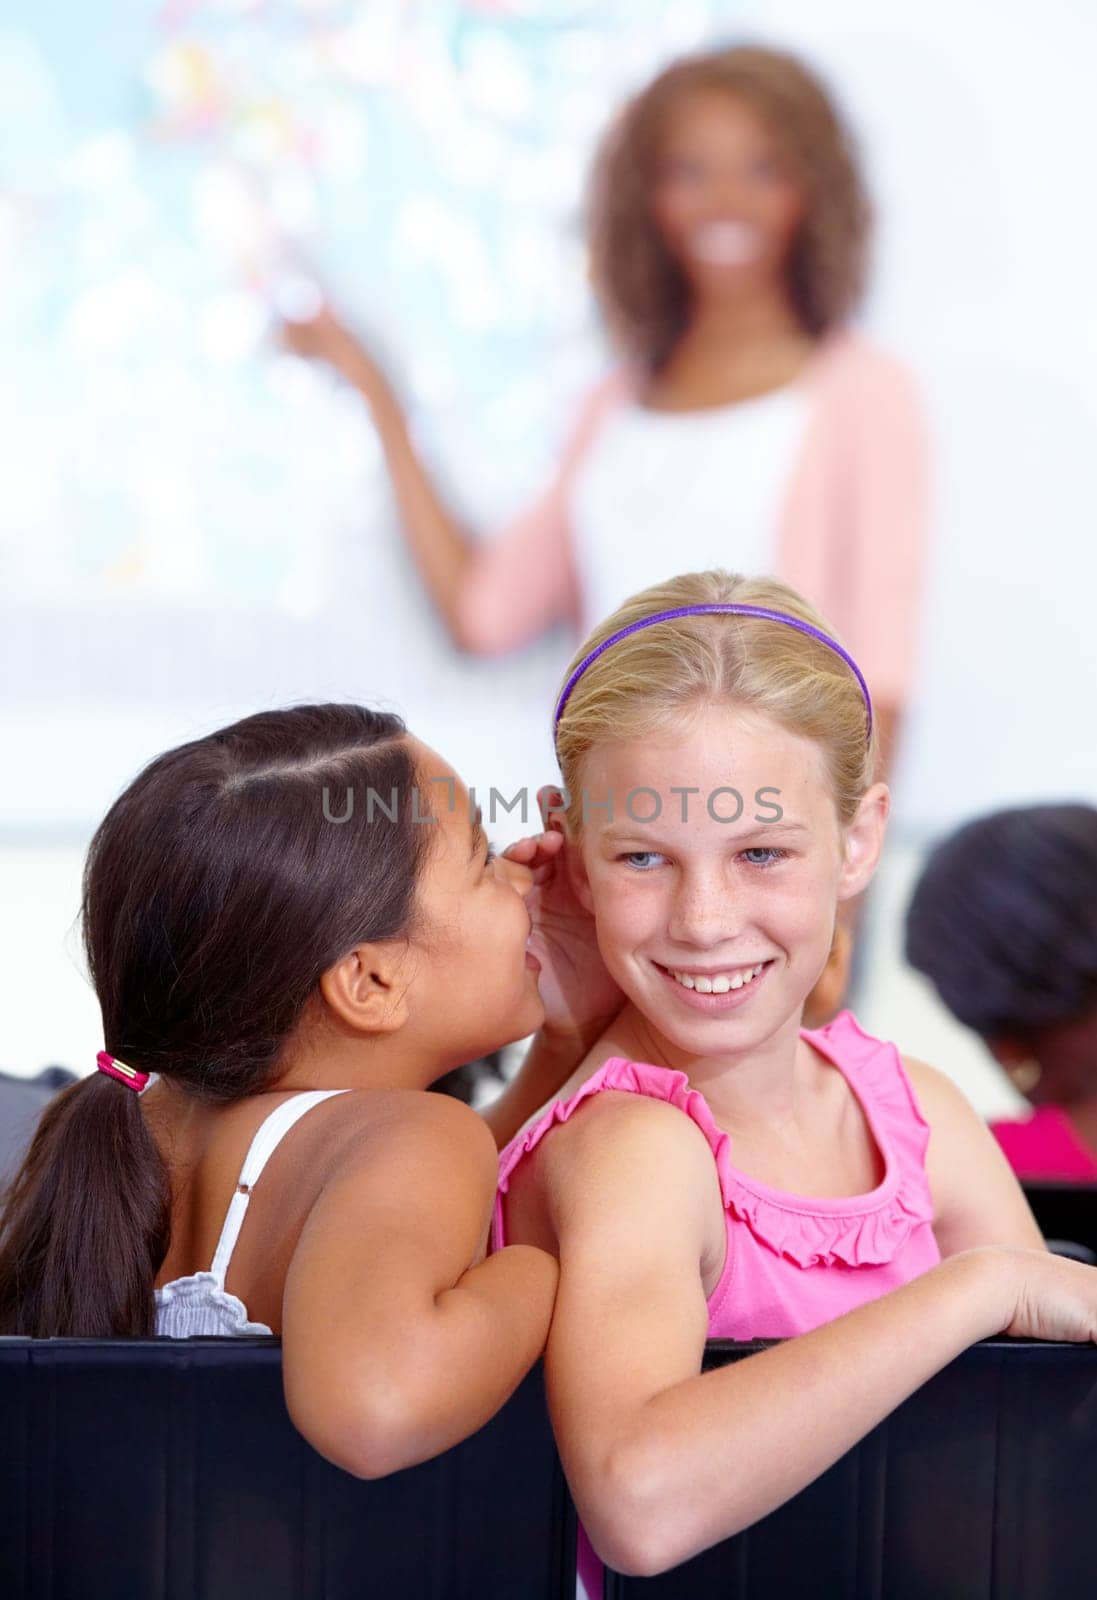 Little girls, whisper and classroom in ear for secret, gossip or communication in lesson at school. Children, students or friends listening to rumor, information or class together with teacher.